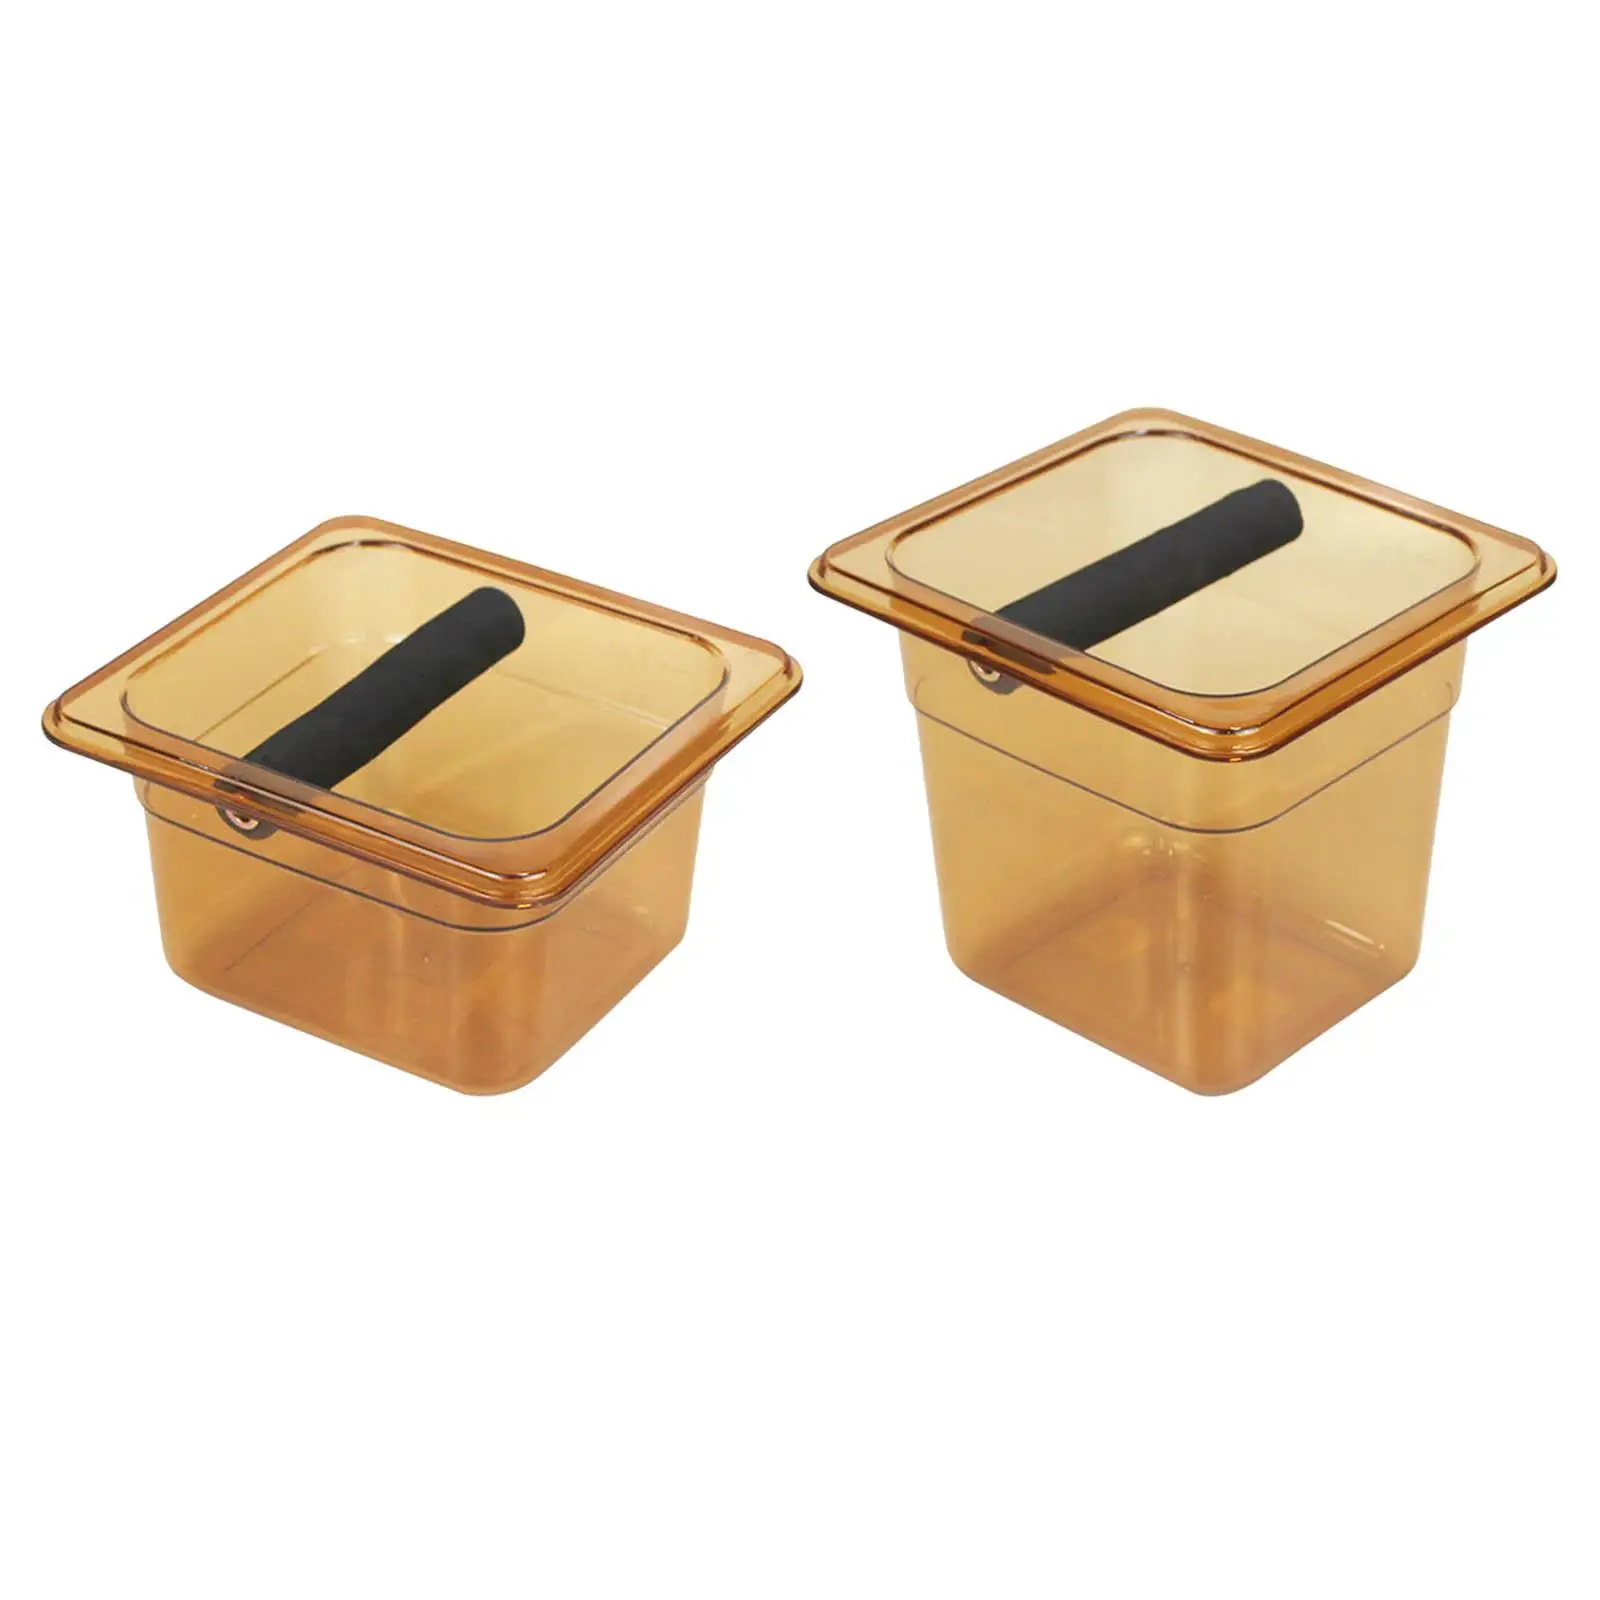 Acrylic Coffee Waste Container Built in Desktop Waste Bucket Coffee Drawer Compact Espresso Knock Case for Hotel Kitchen